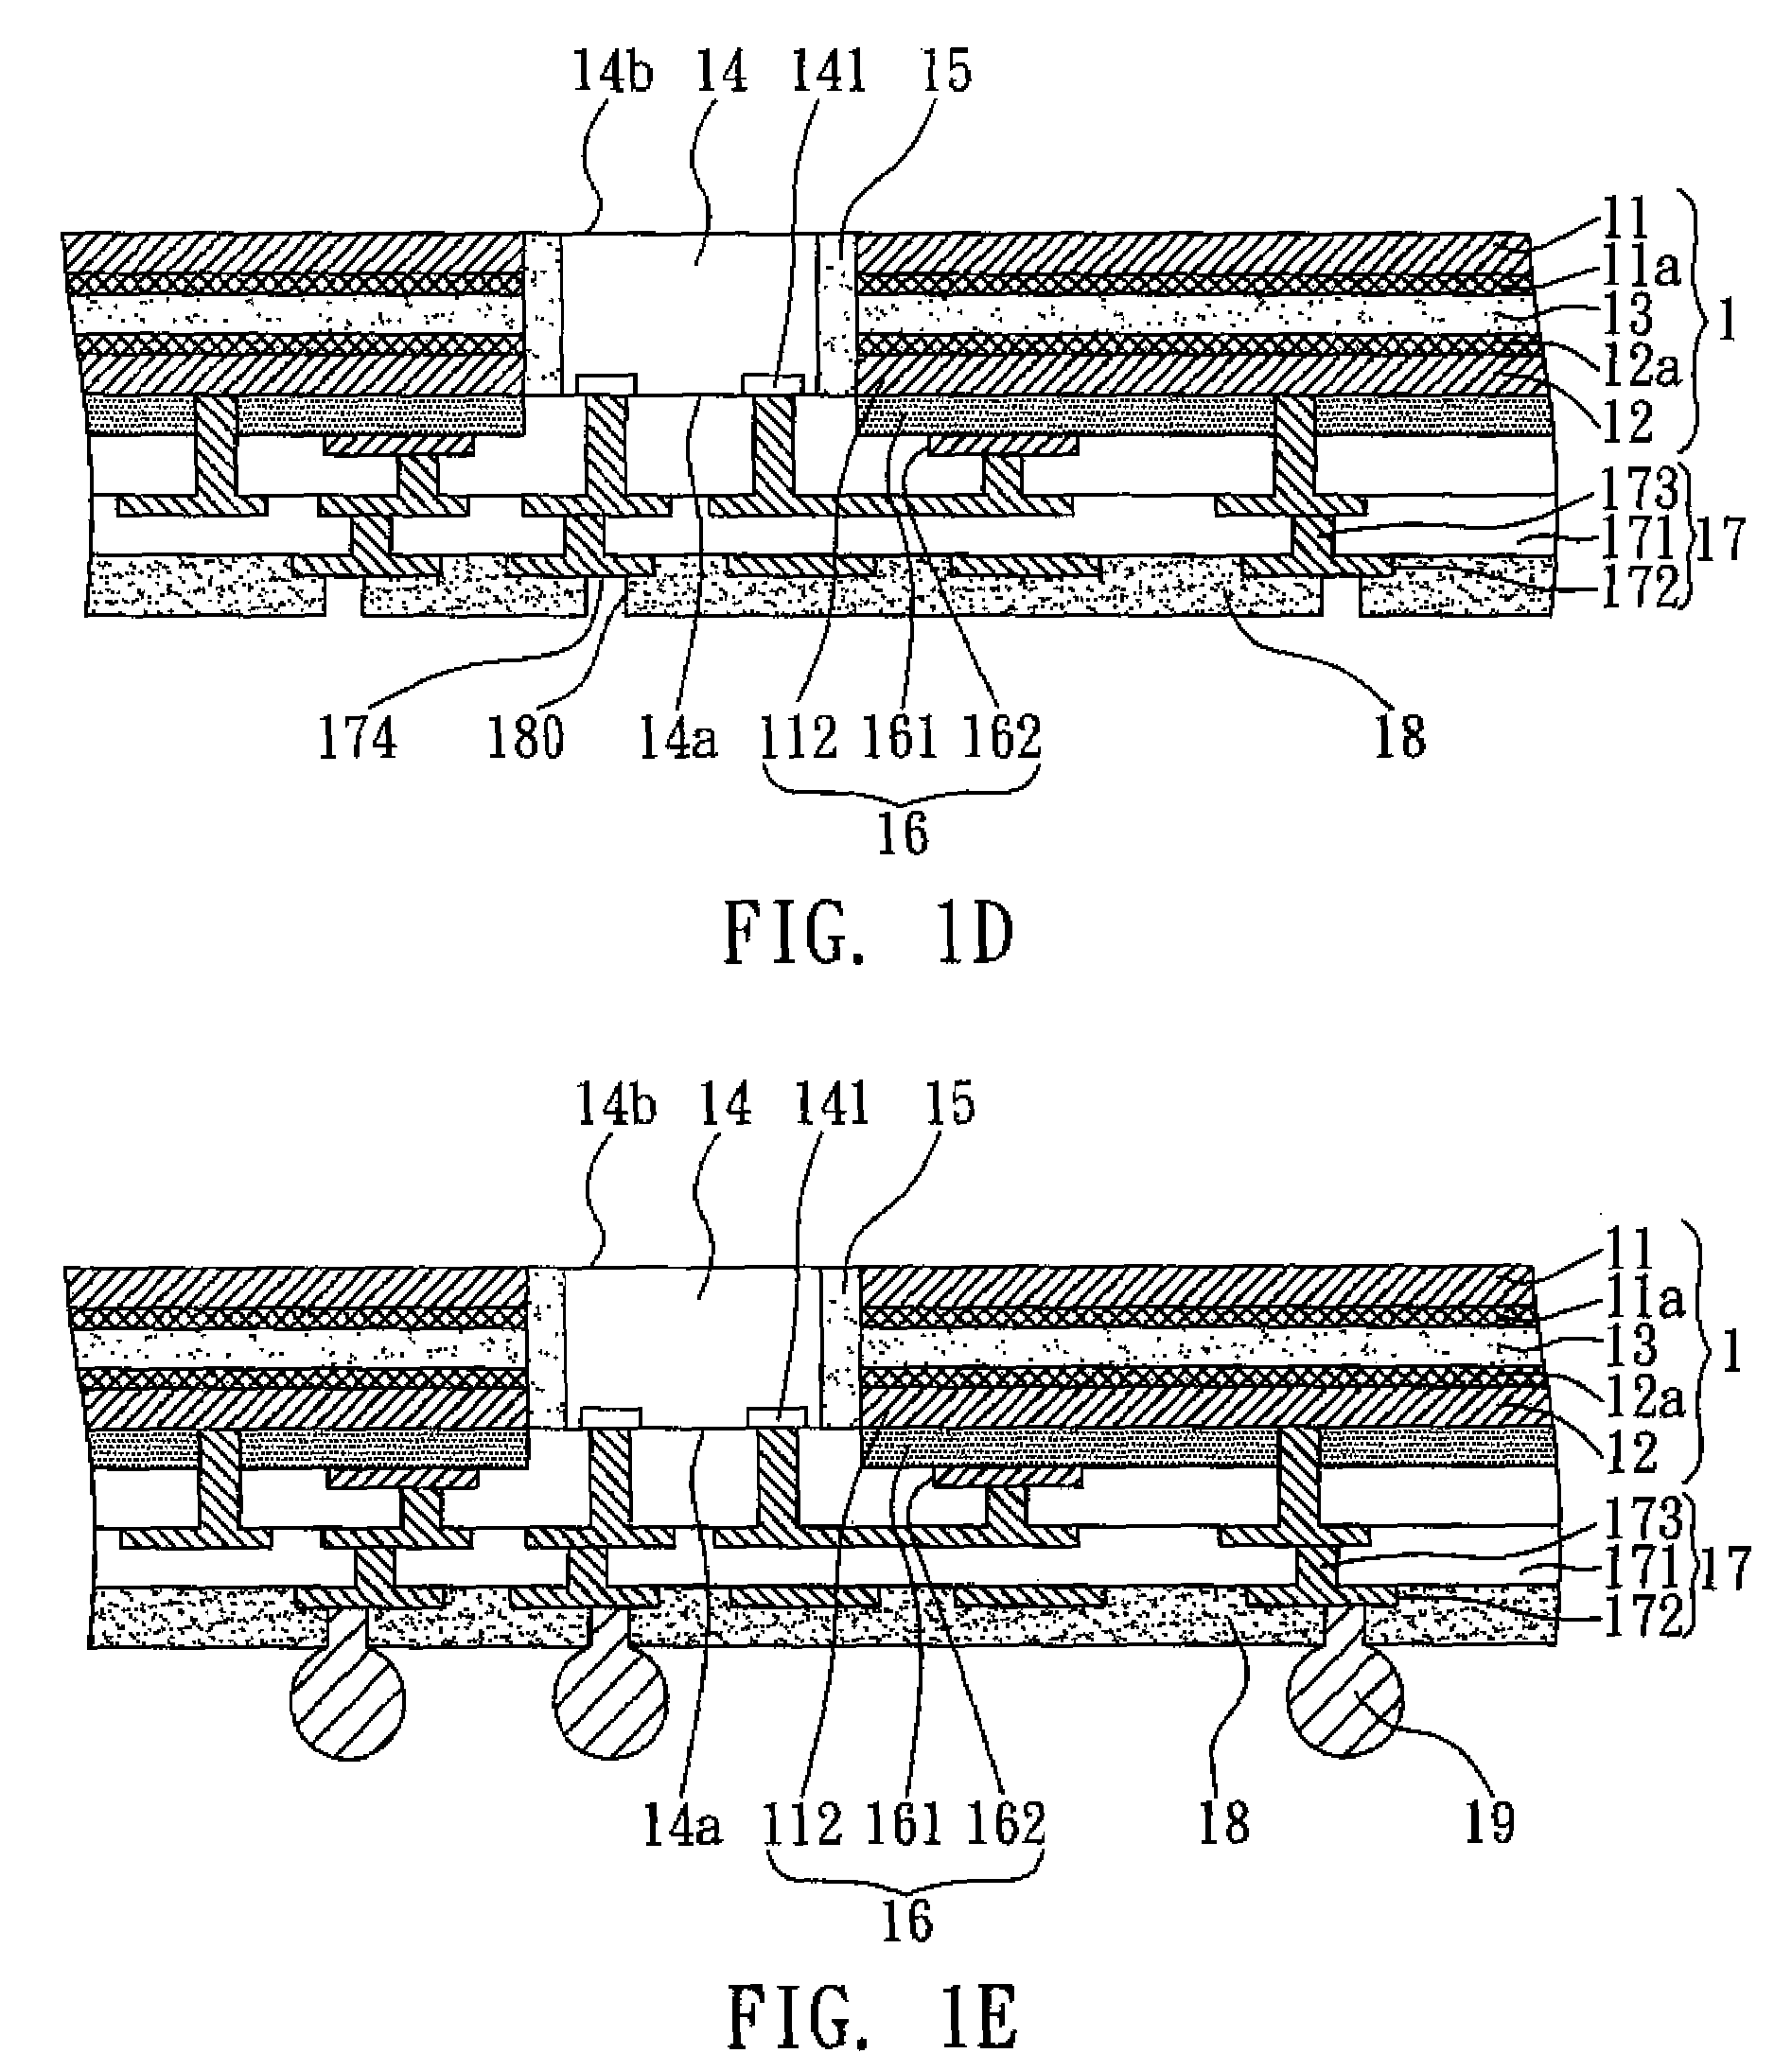 Circuit board structure with embedded electronic components